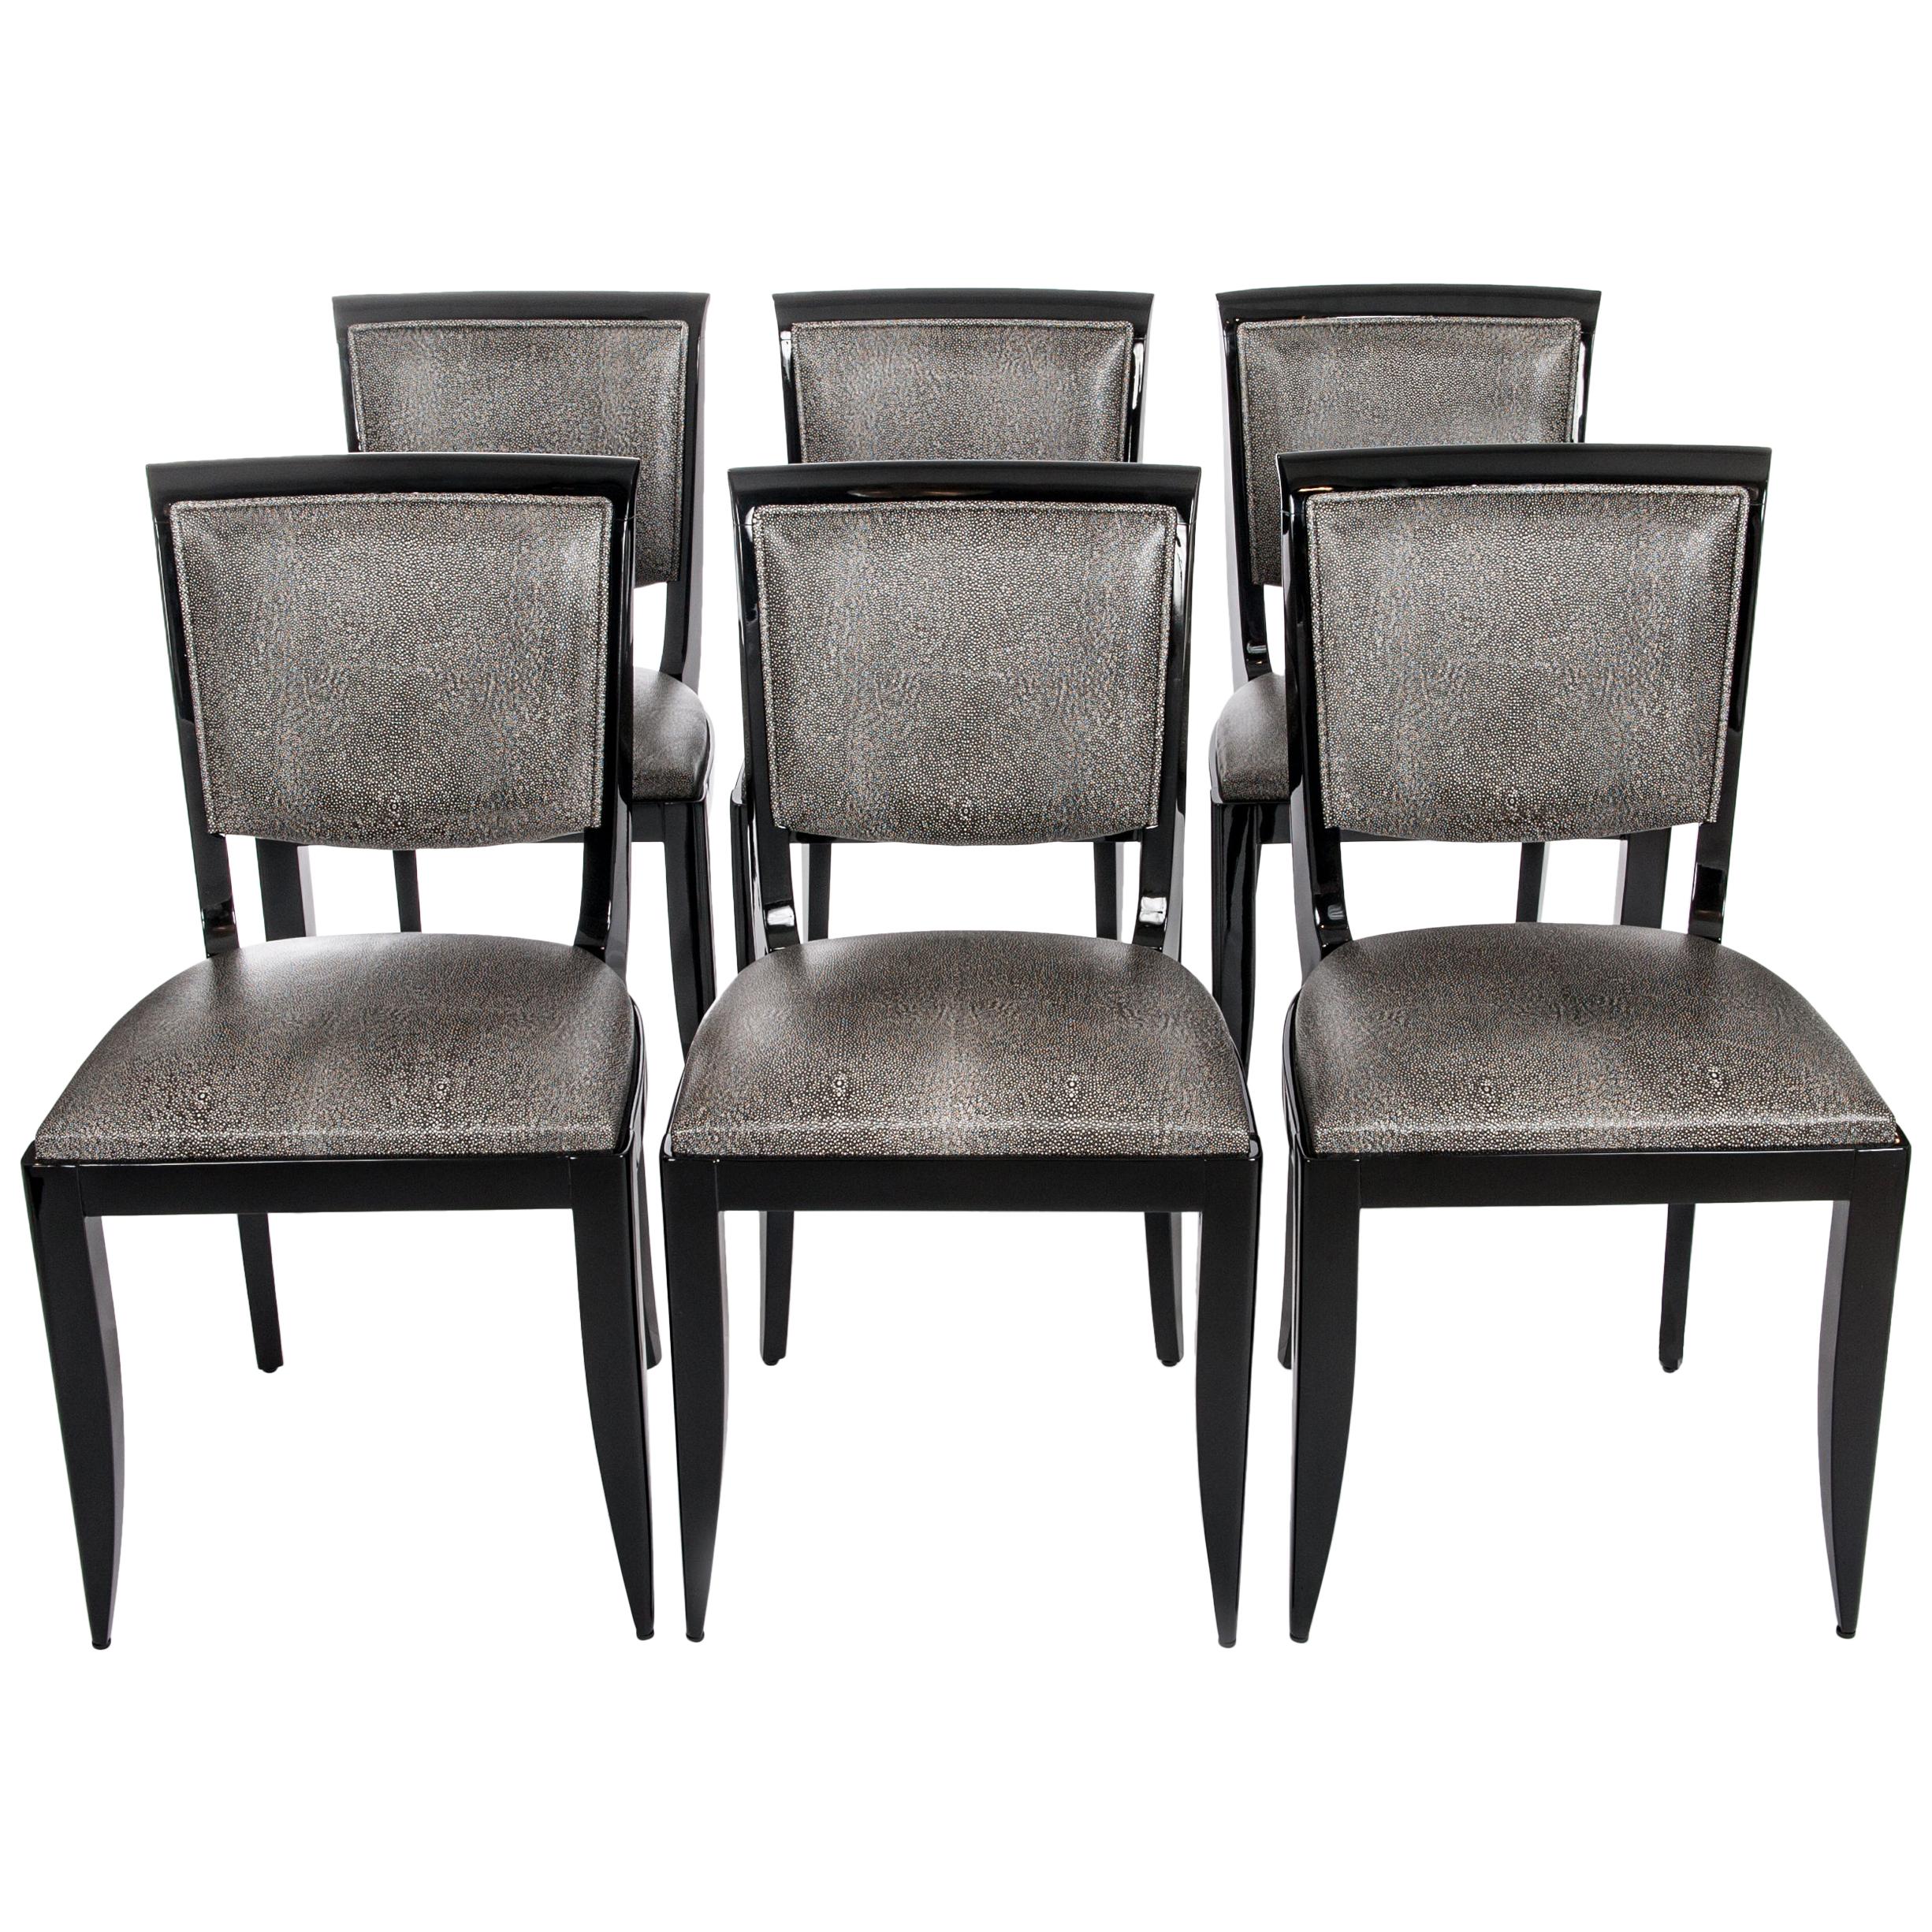 Dining Room Chairs Black, Black And White Leather Dining Room Chairs